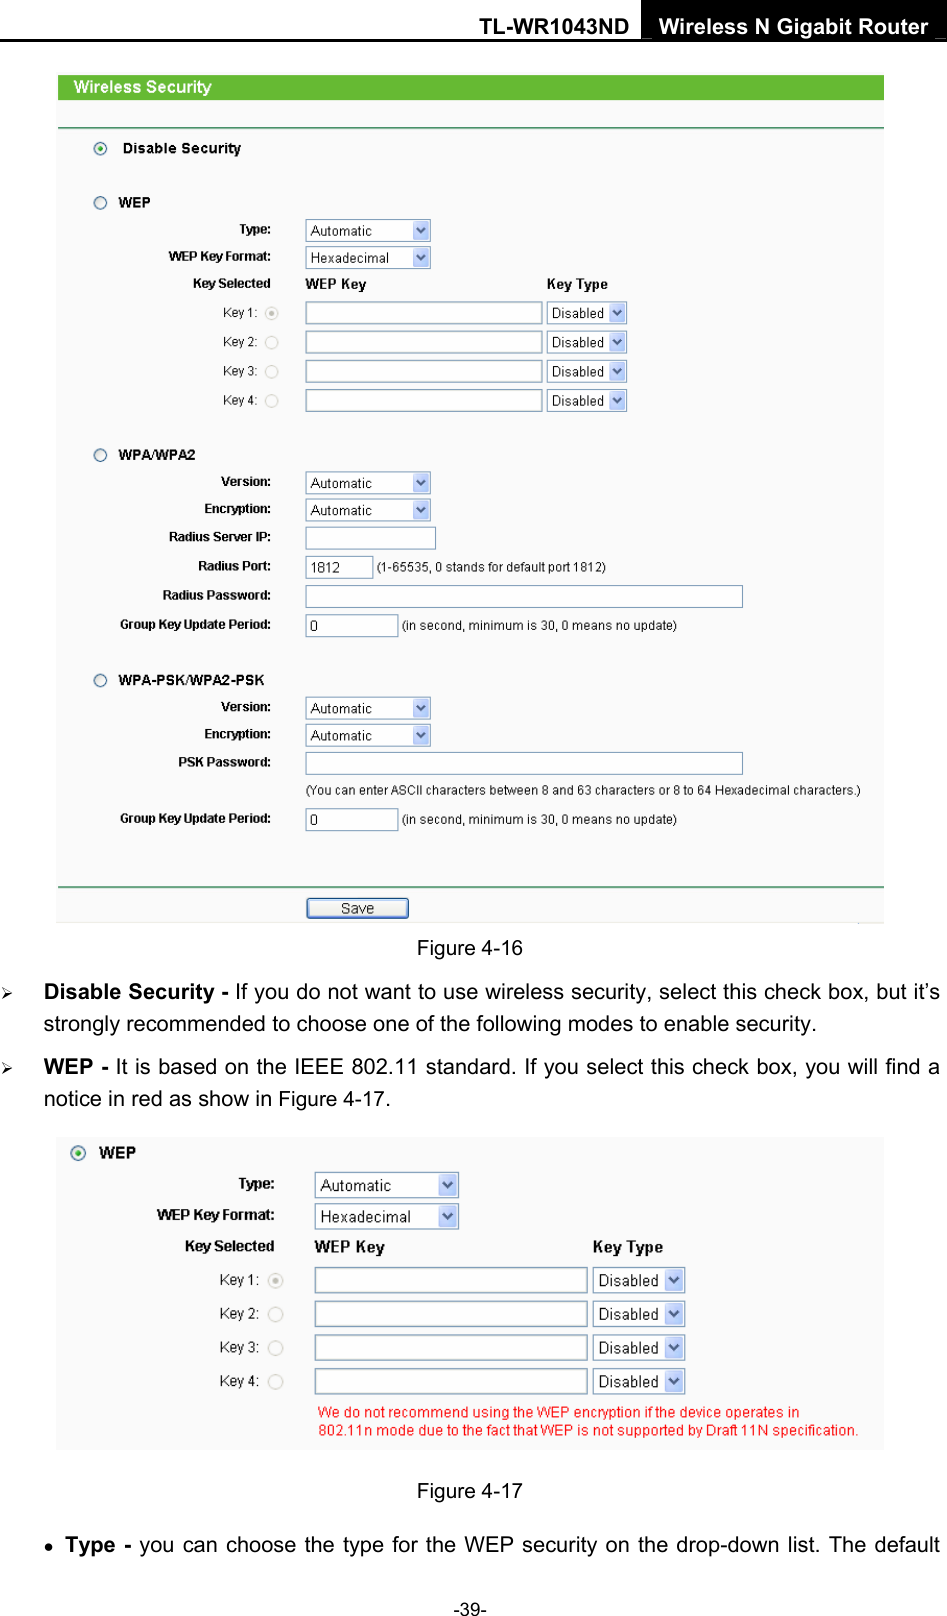 TL-WR1043ND Wireless N Gigabit Router  -39-  Figure 4-16 ¾ Disable Security - If you do not want to use wireless security, select this check box, but it’s strongly recommended to choose one of the following modes to enable security. ¾ WEP - It is based on the IEEE 802.11 standard. If you select this check box, you will find a notice in red as show in Figure 4-17.   Figure 4-17 • Type - you can choose the type for the WEP security on the drop-down list. The default 